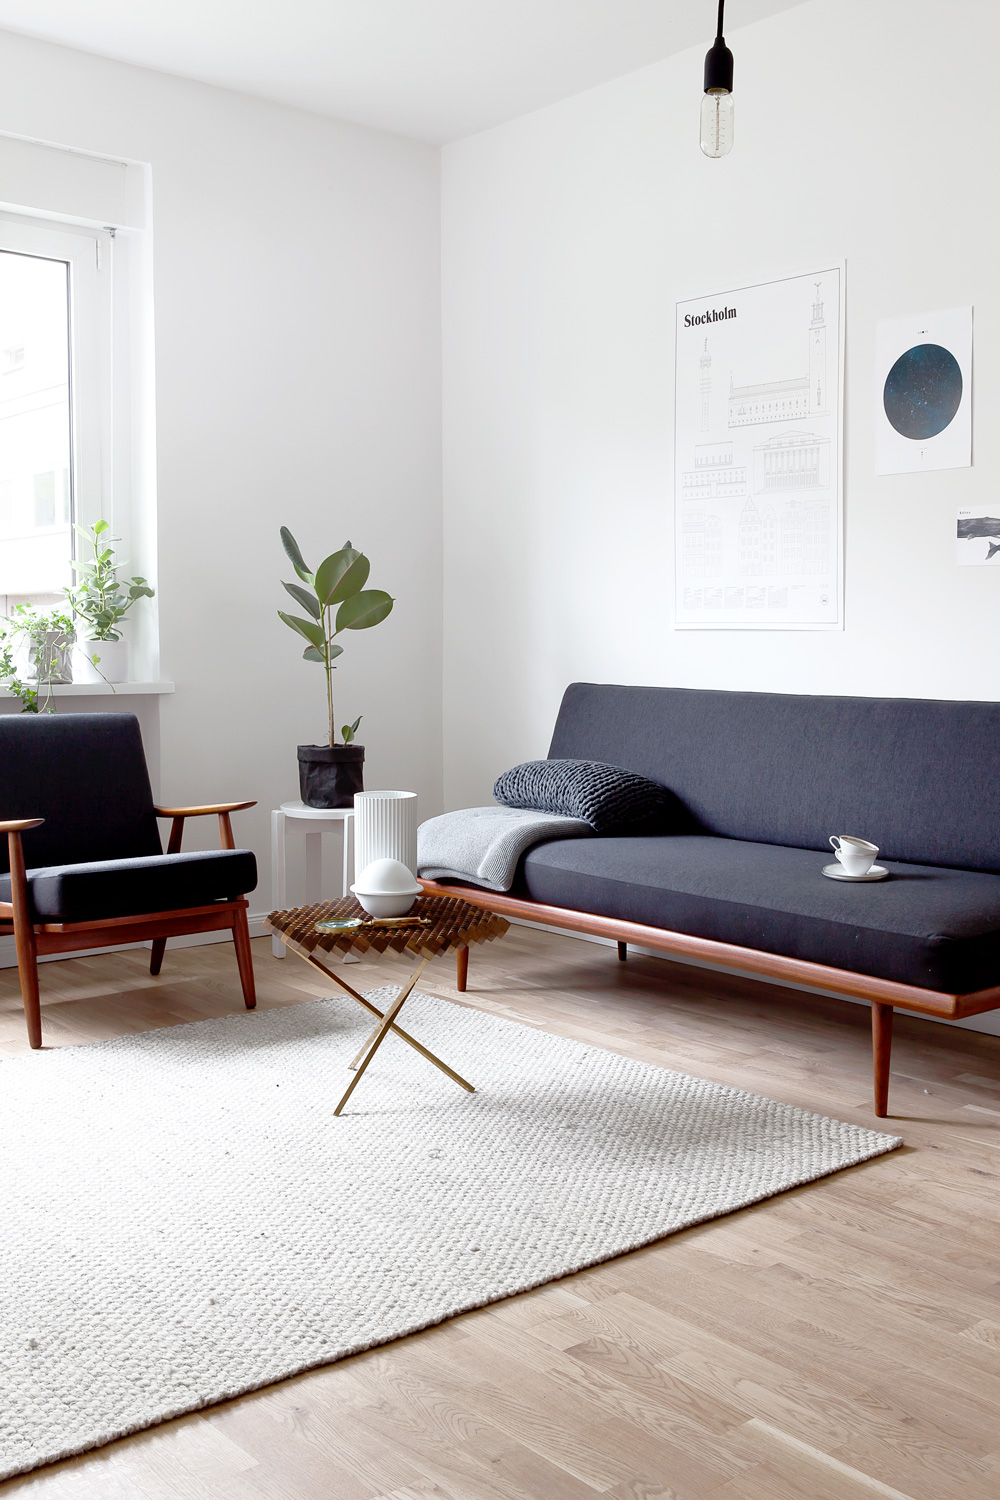 Everything You Need to Know About Minimalist Design